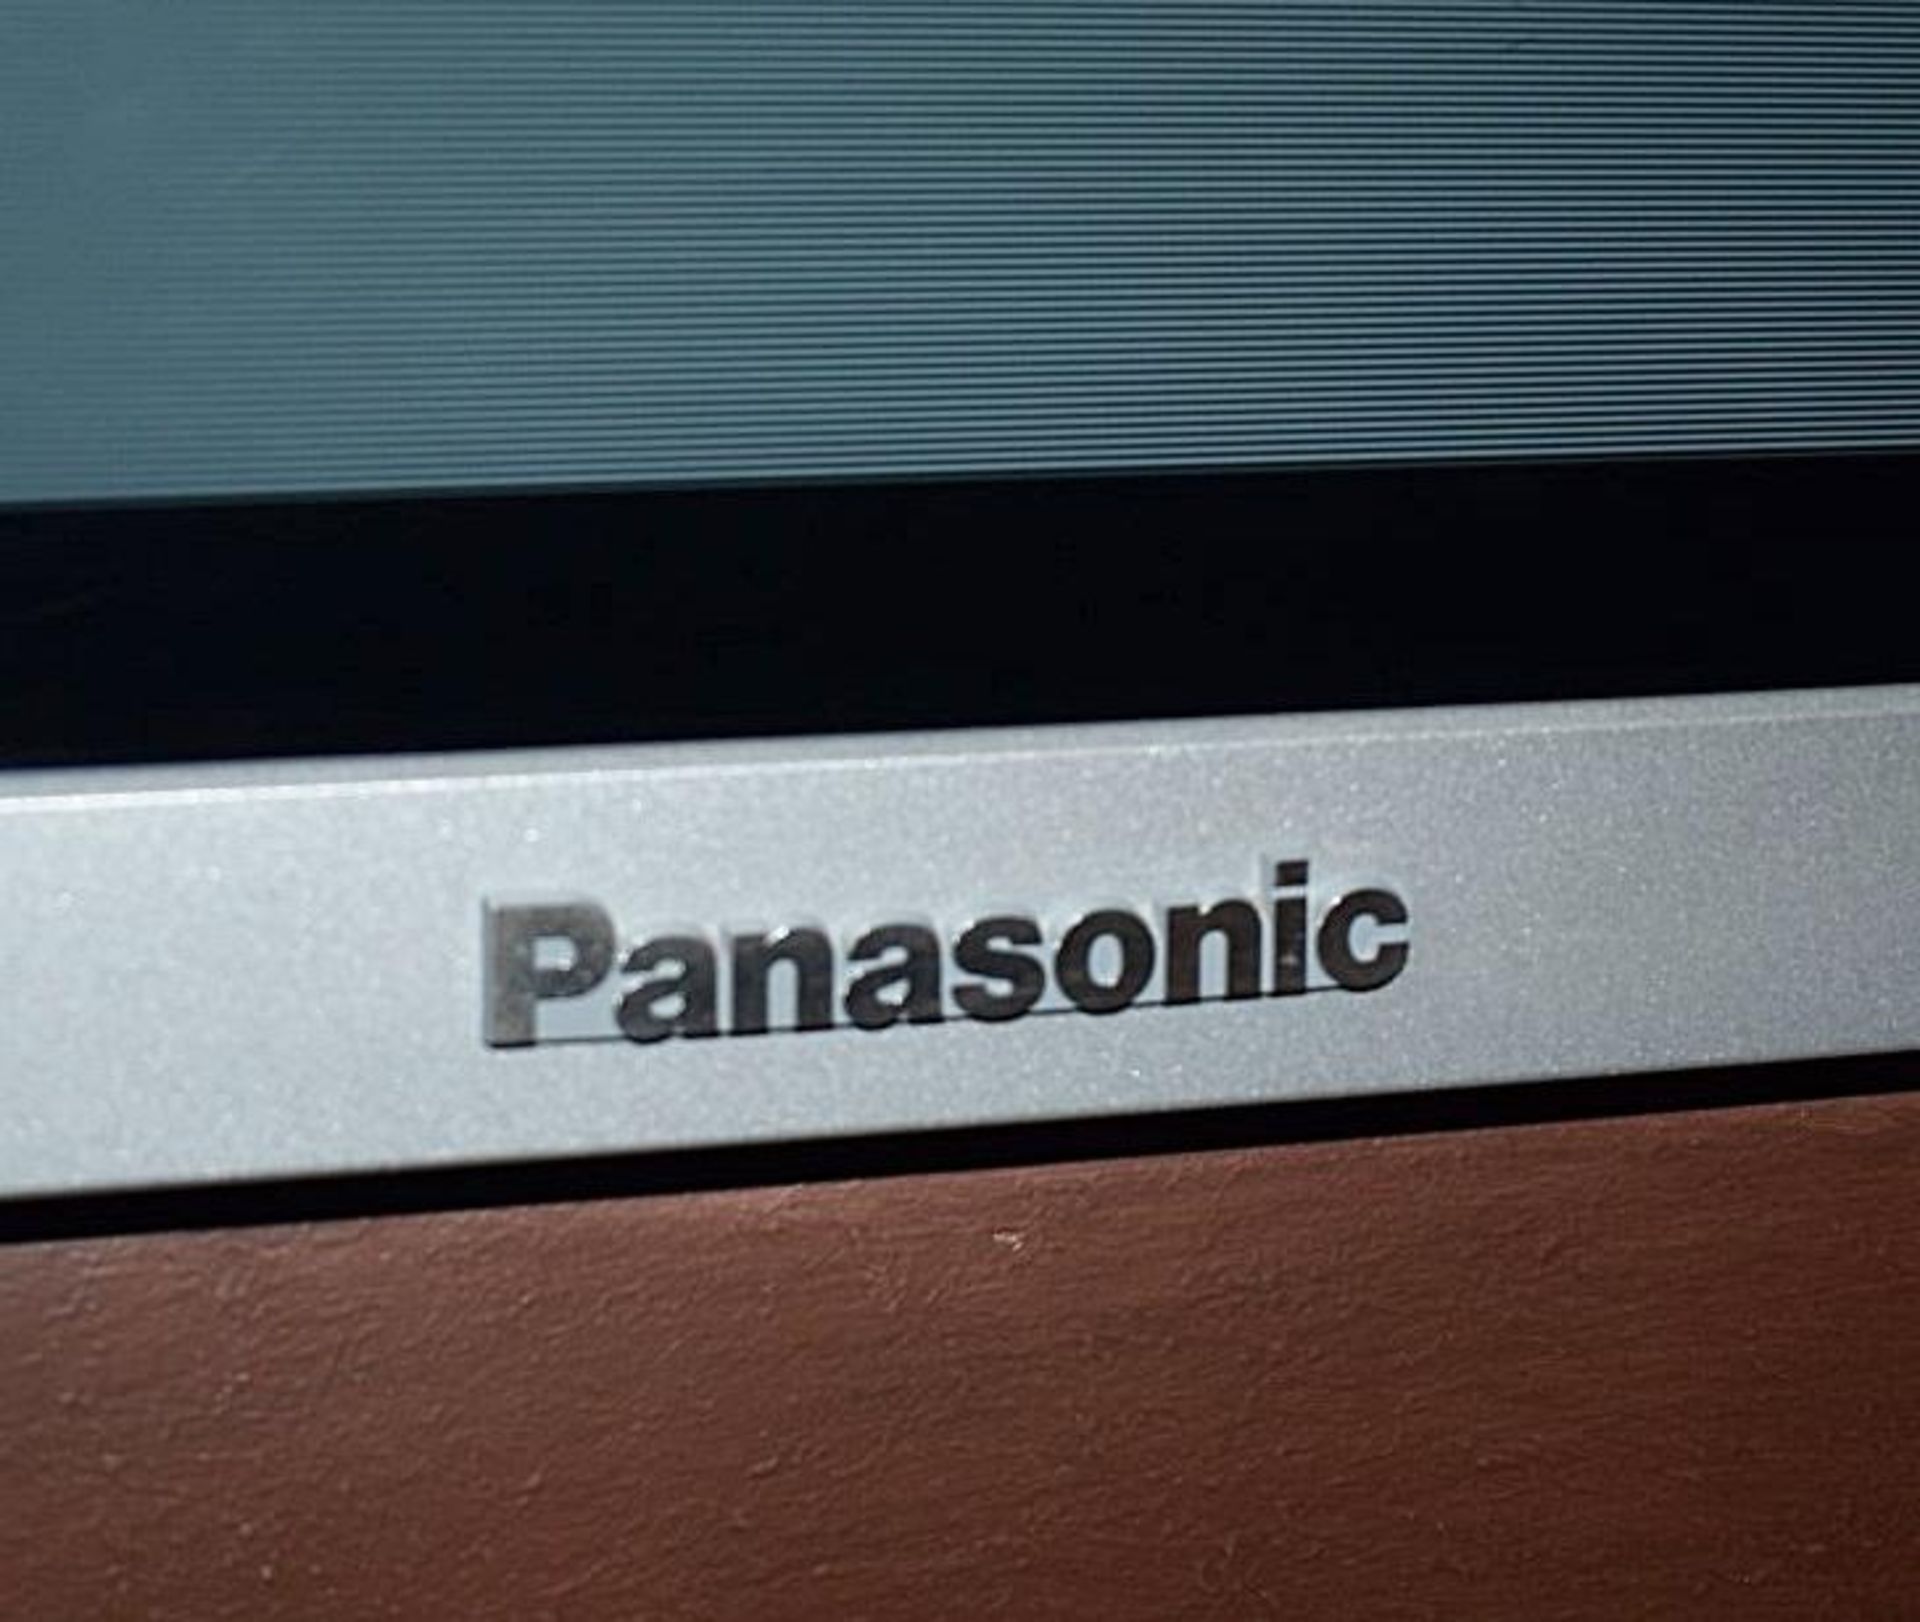 1 x PANASONIC 50" Flat Panel Plasma Display Monitor With 2 x Speakers And Remote Control (TH-50PHW6) - Image 3 of 4